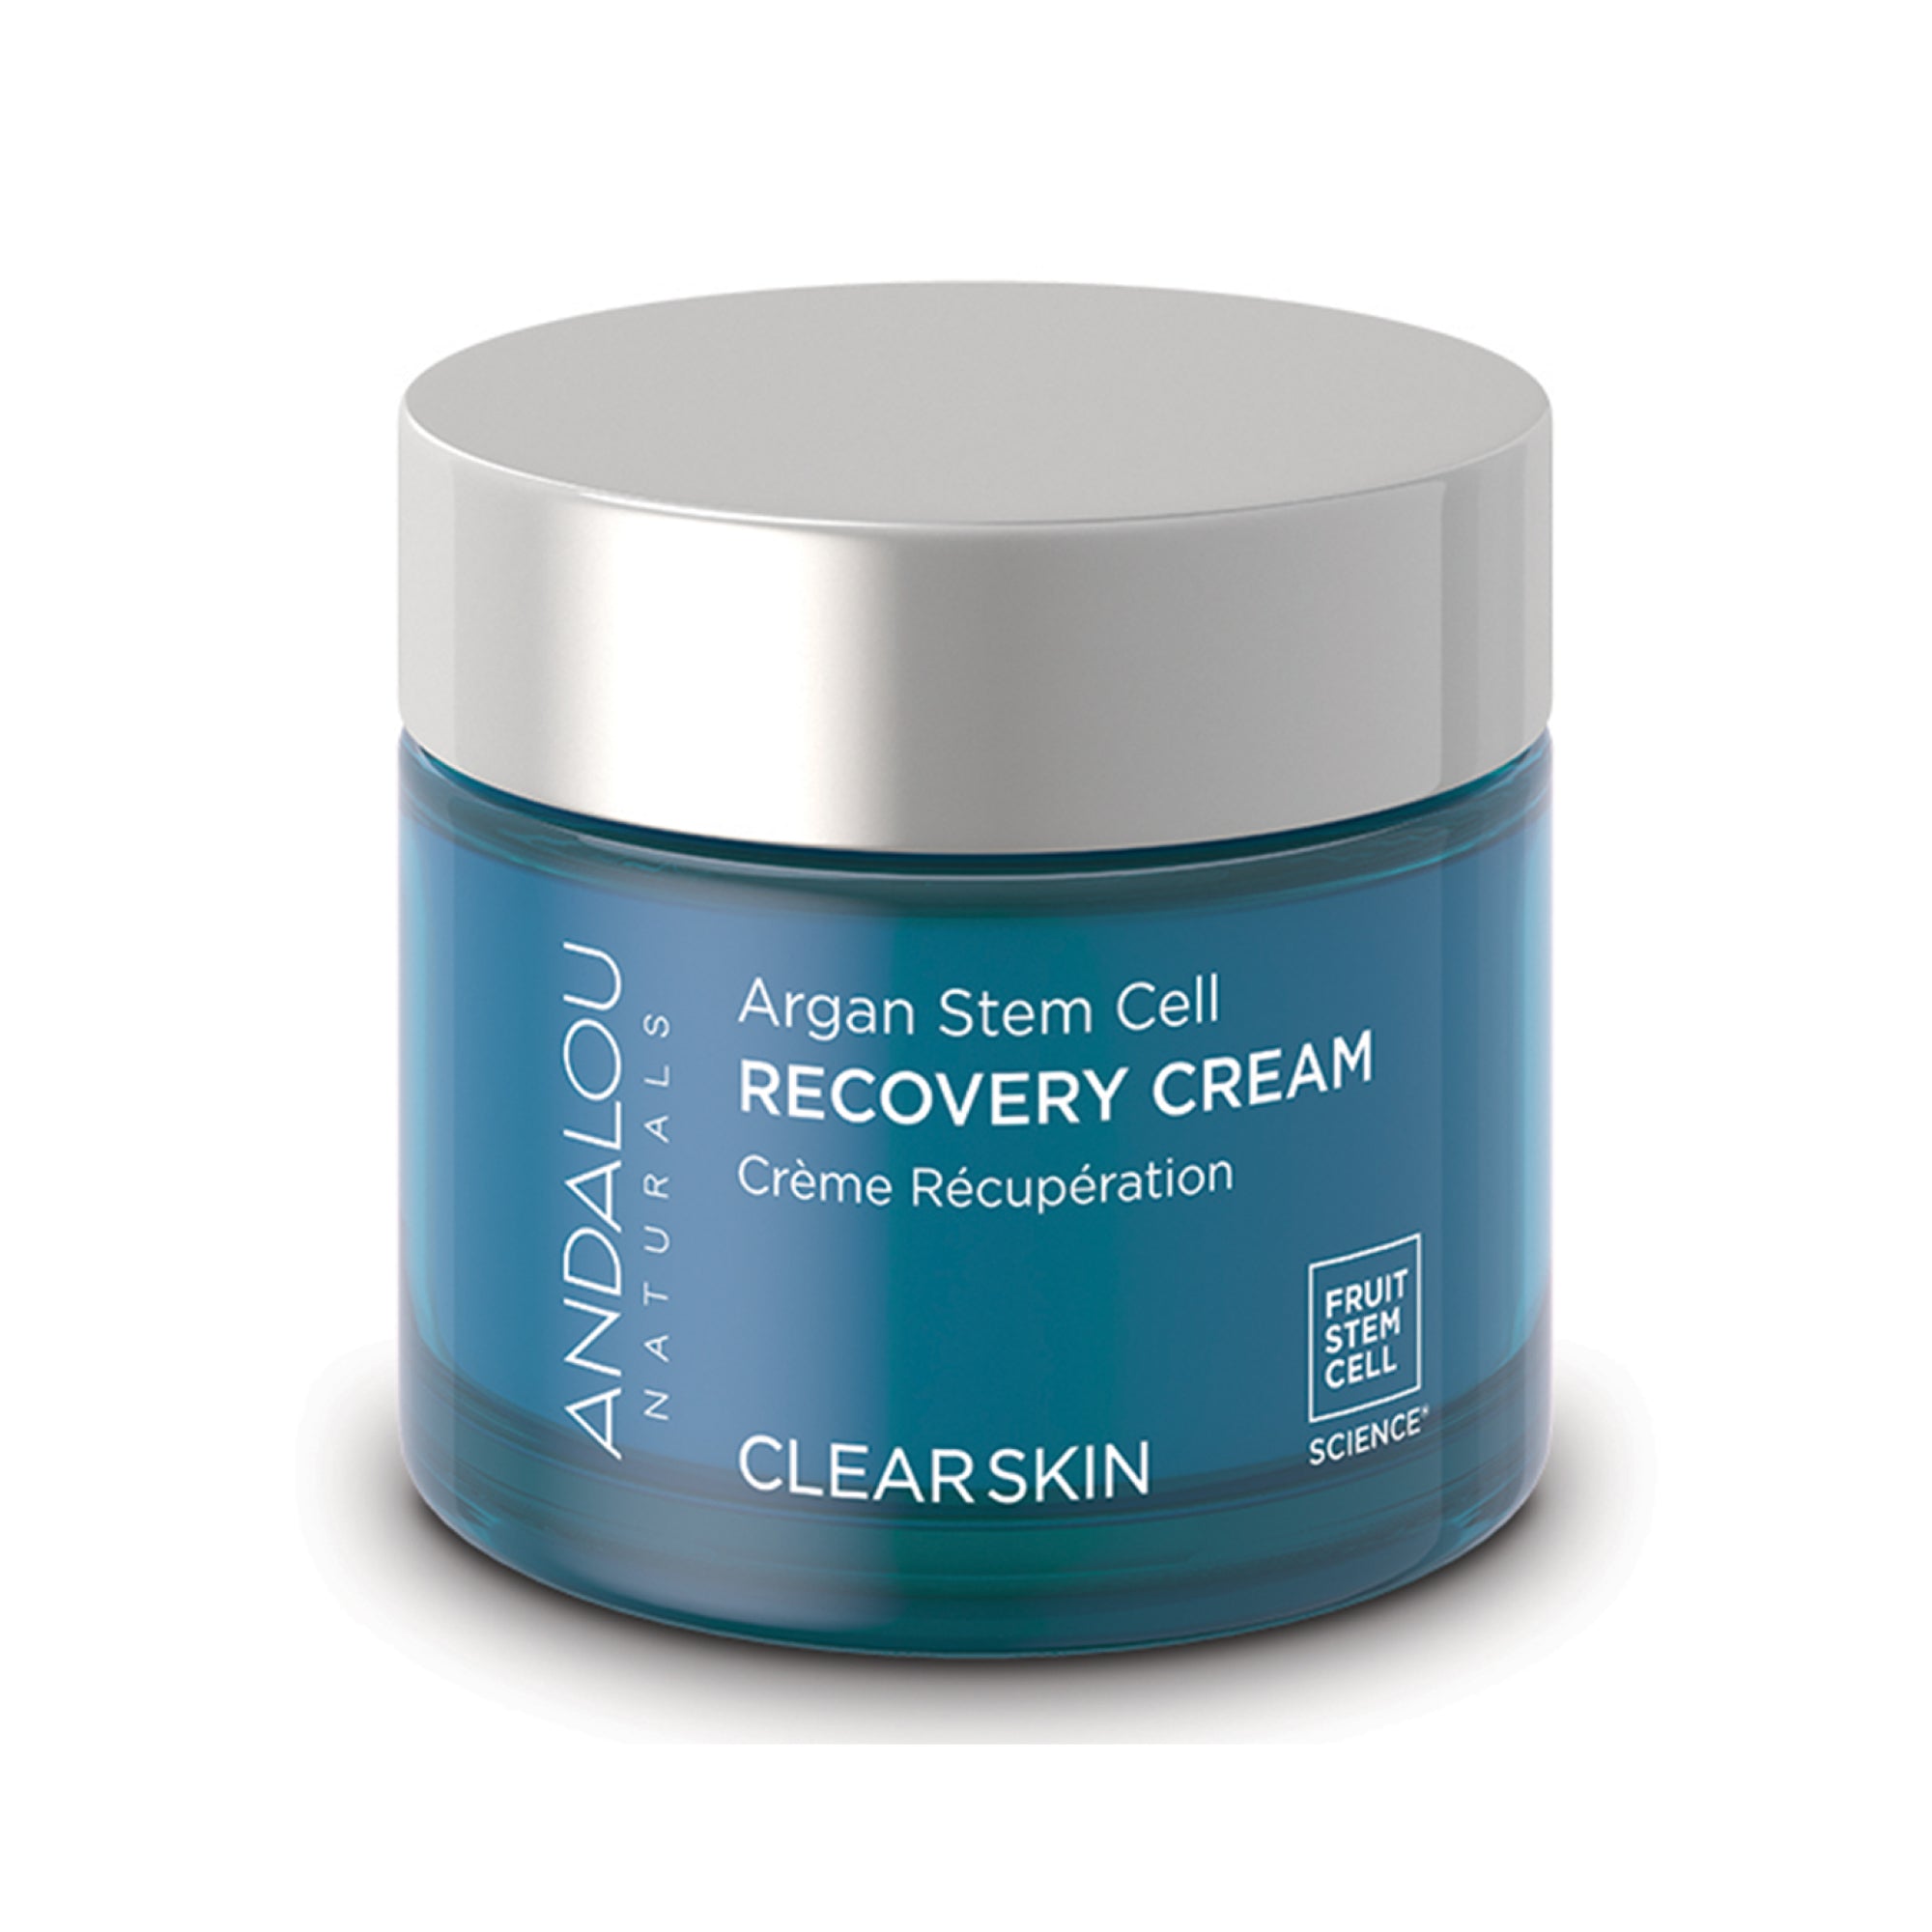 Andalou Naturals Clear Skin Recovery Cream Argan Stem Cell 50g